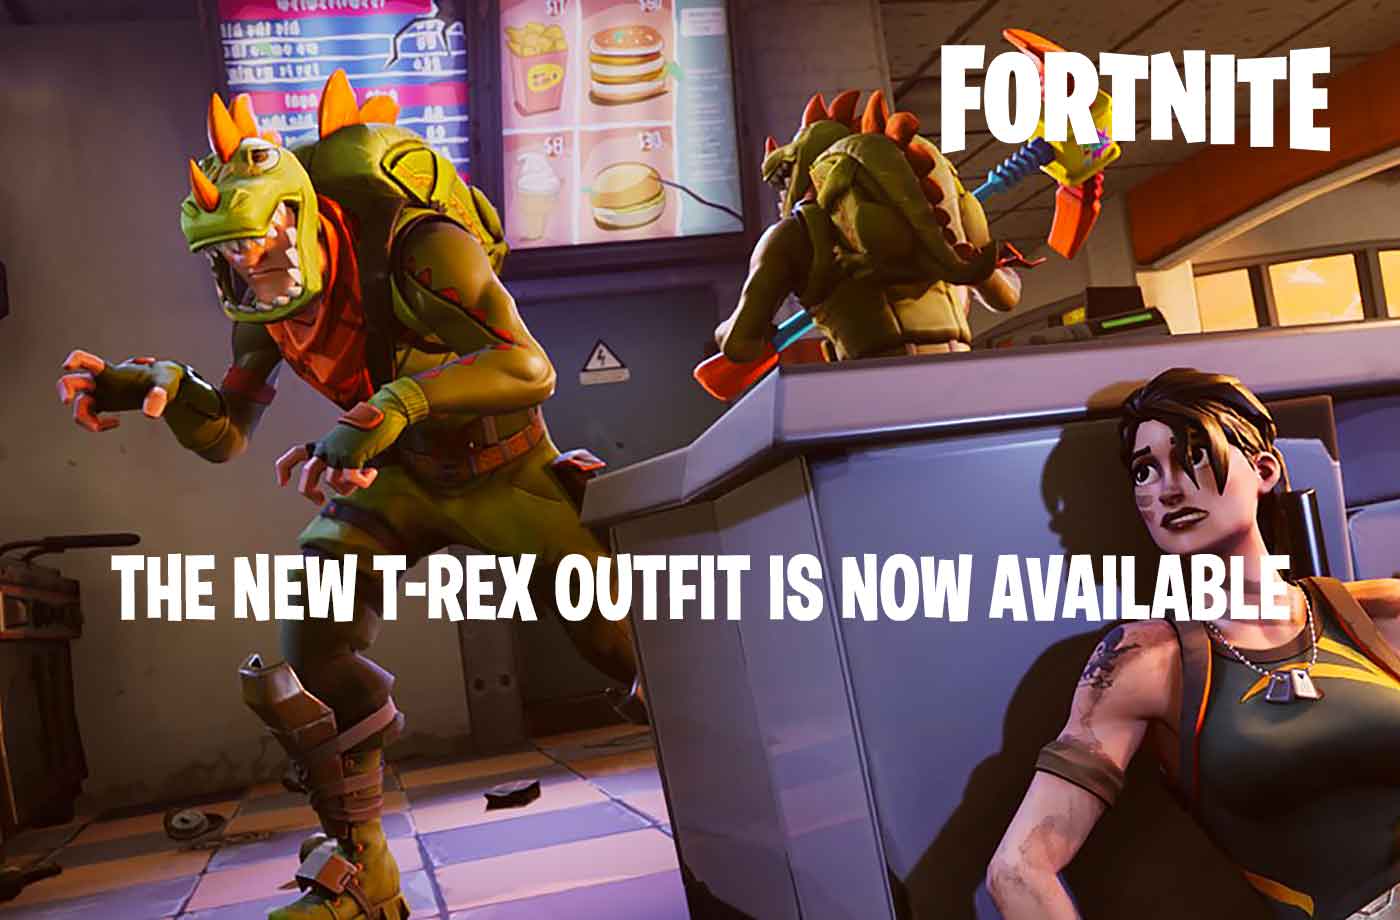 T Rex Battle Star Fortnite Fortnite Battle Royale The New T Rex Outfit Is Now Available How To Unlock The Skin Kill The Game